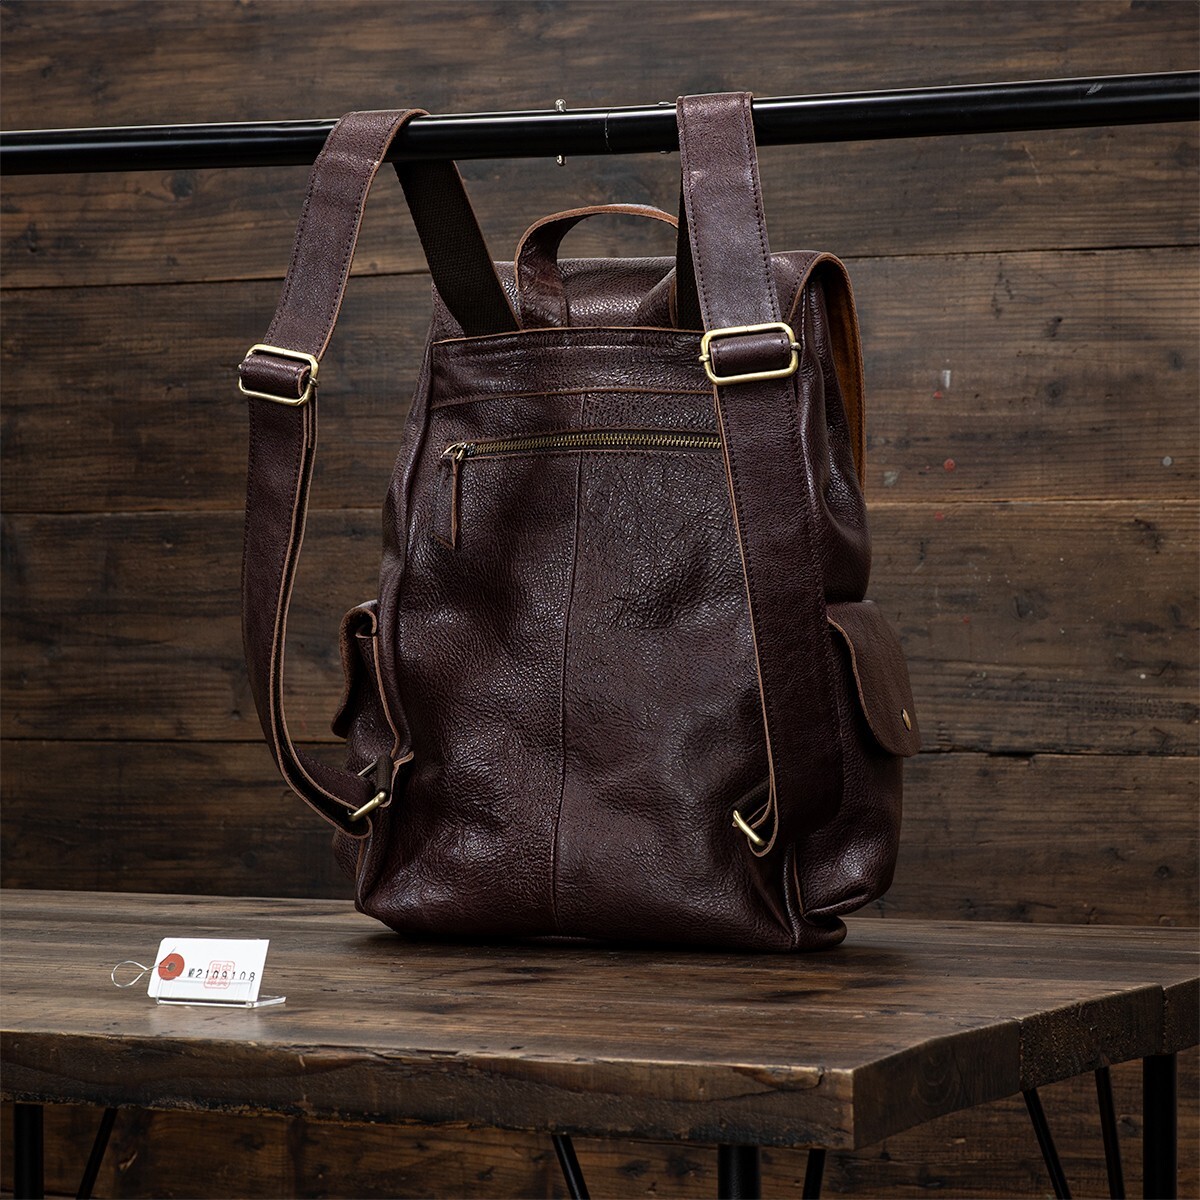 [ new goods ] original leather rucksack backpack bag Day Pack bag bag cow leather leather unused free shipping 1 jpy tea Brown rice field middle leather .